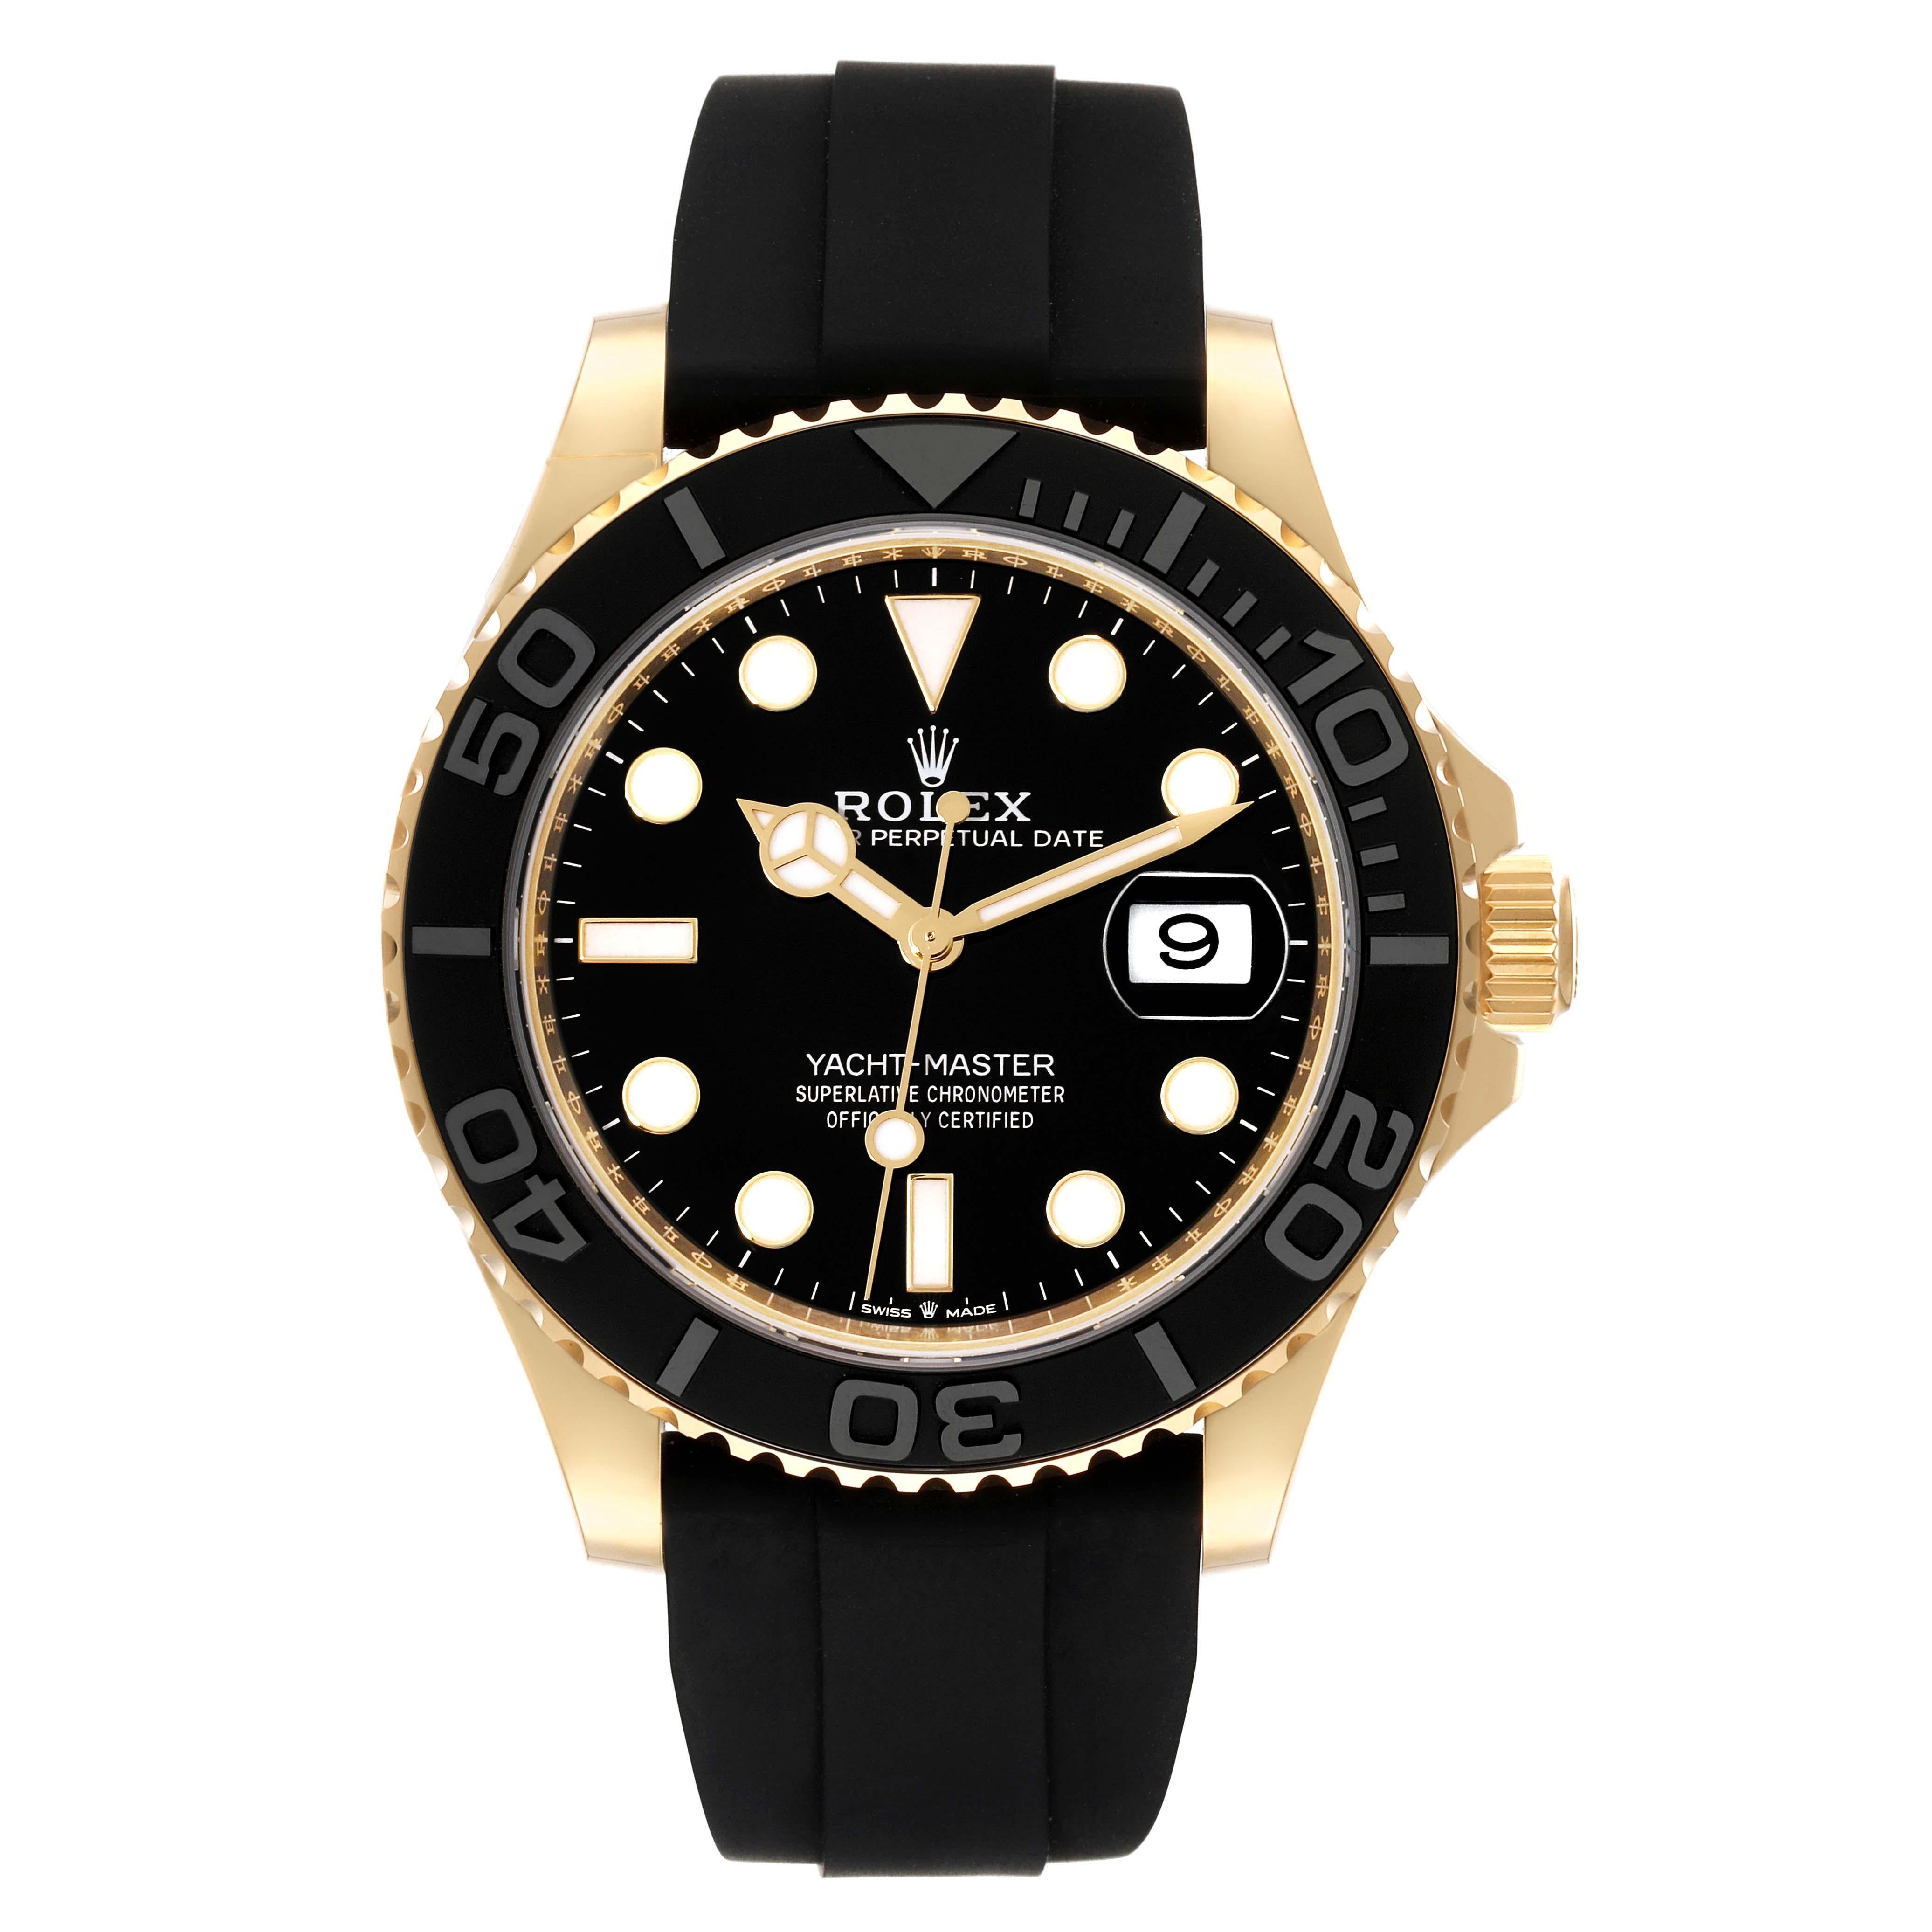 Rolex Yacht-Master Yellow Gold Oysterflex Bracelet Mens Watch 226658 Unworn. Officially certified chronometer automatic self-winding movement. 18K yellow gold case 42.0 mm in diameter. Screwed-down case back and crown, Triplock winding crown